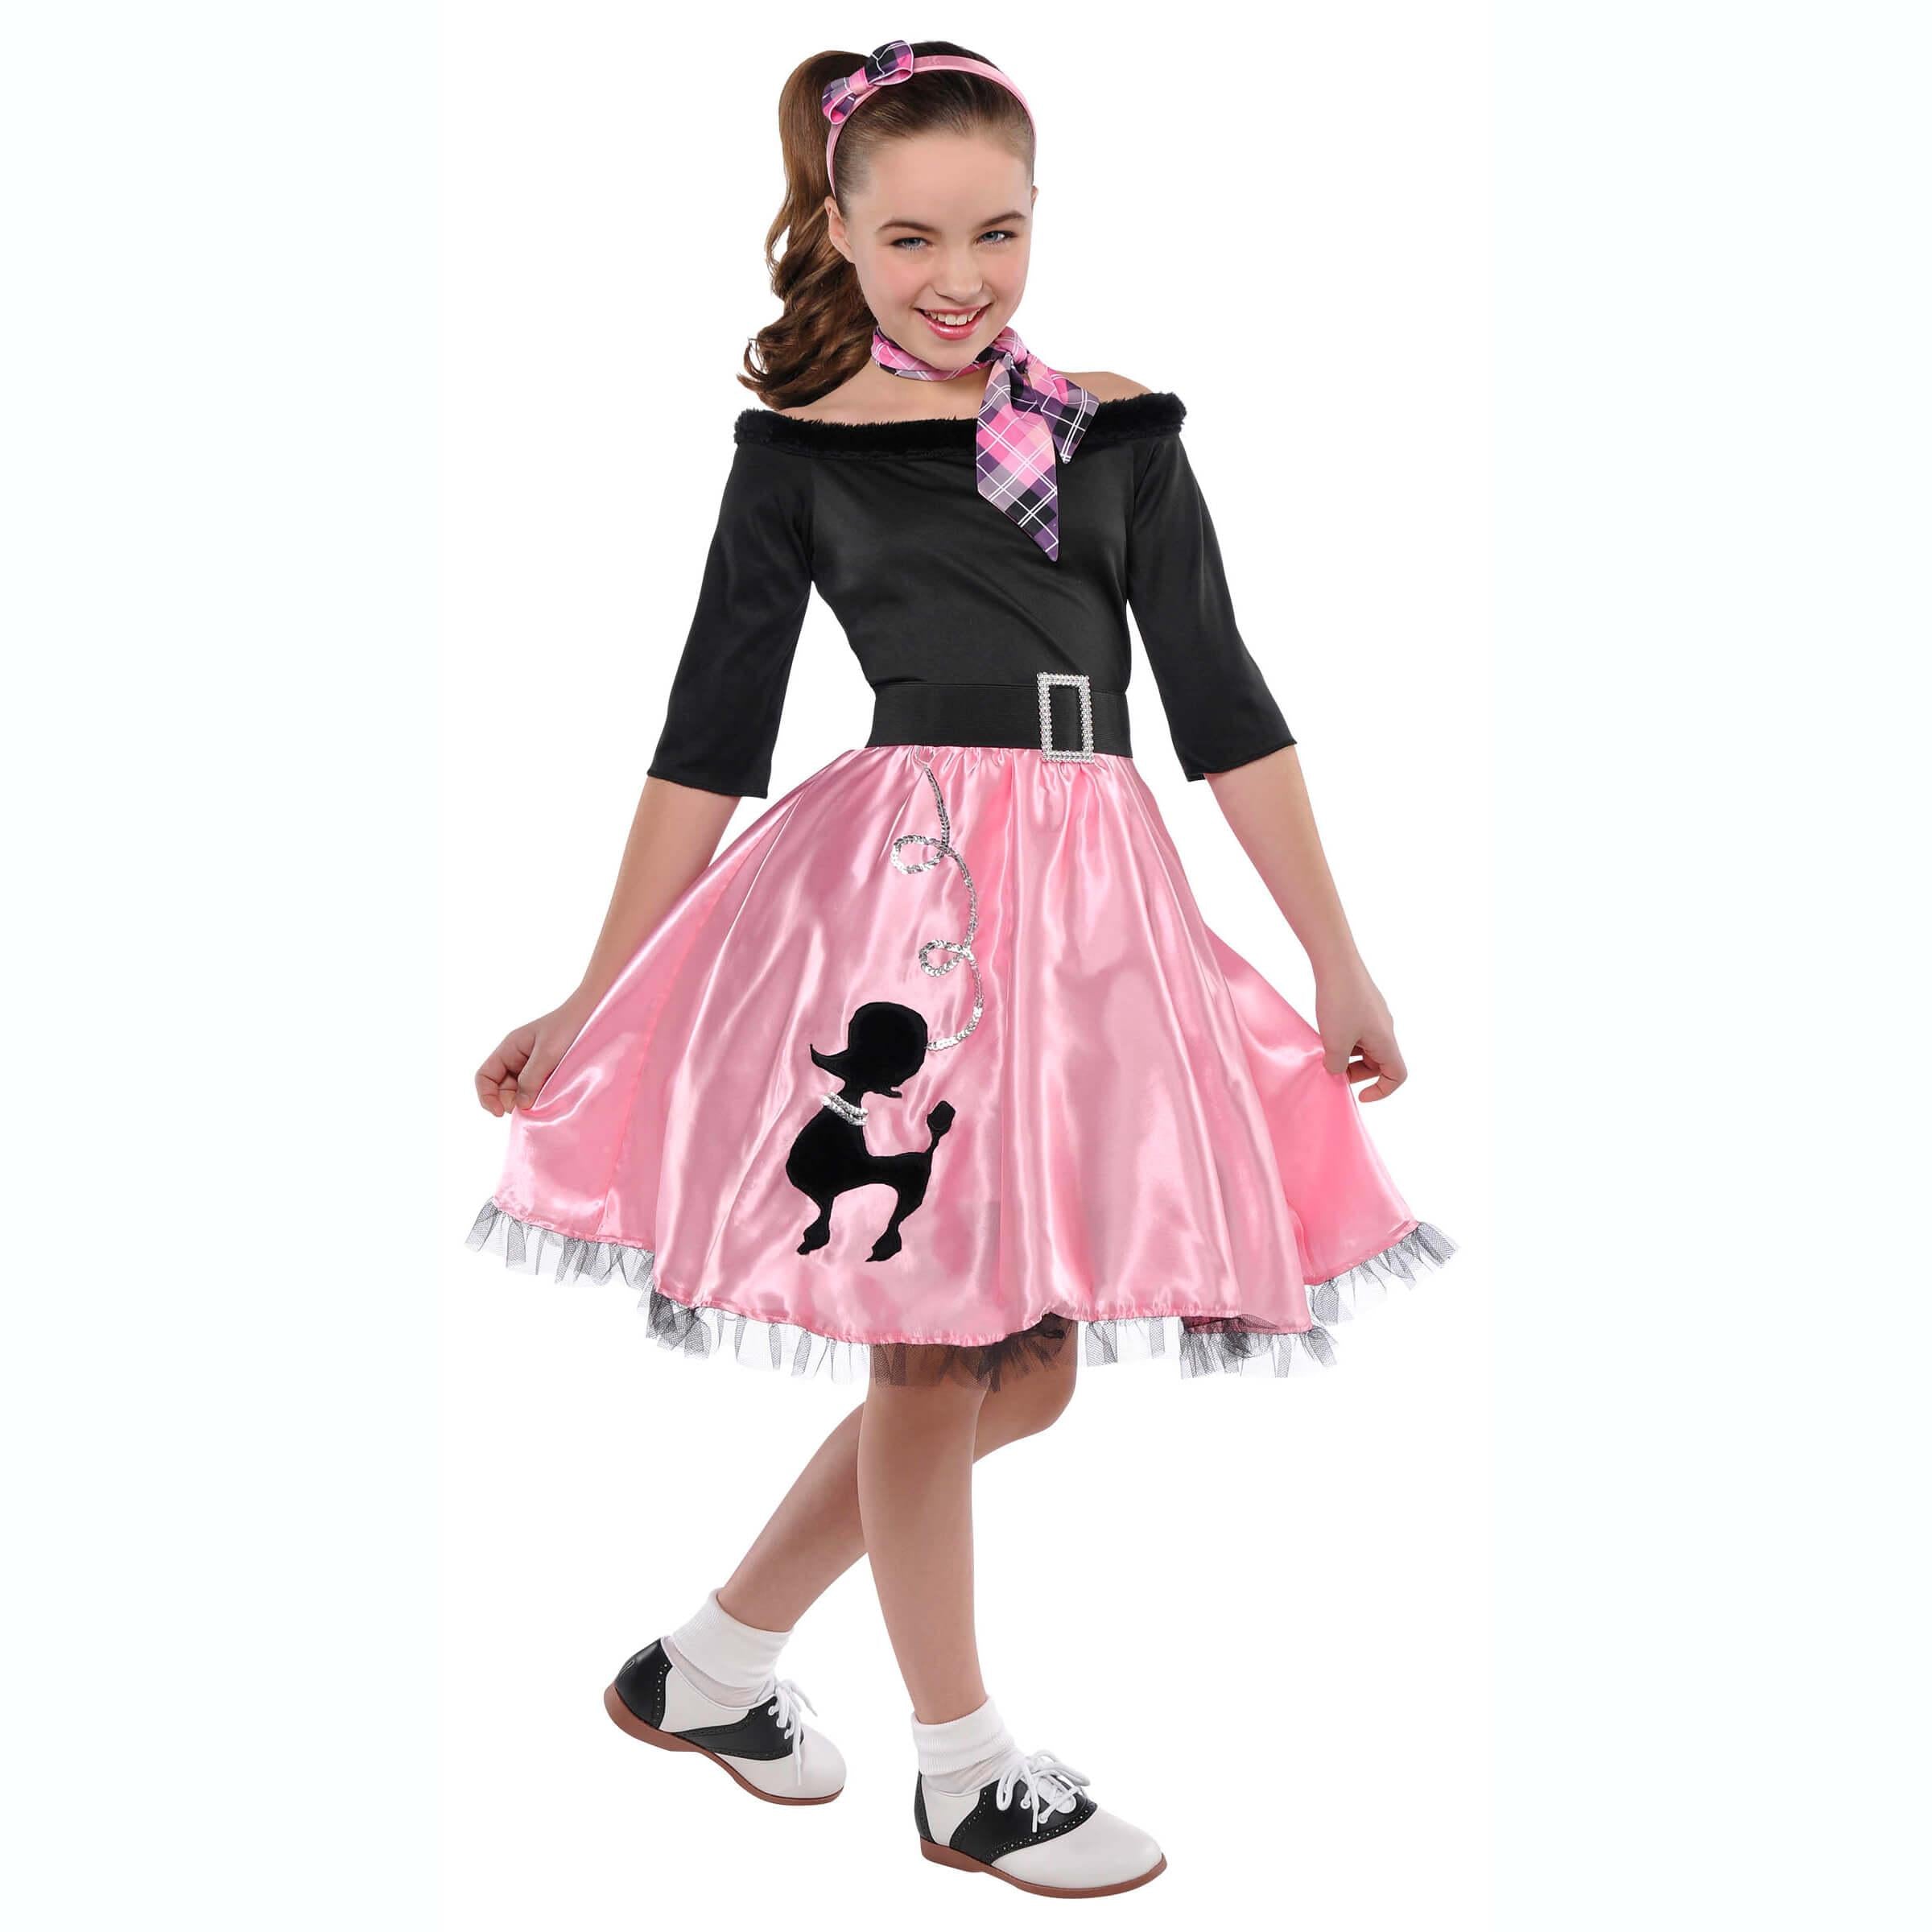 Child Miss Sock Hop 1950s Costume Costumes & Apparel - Party Centre